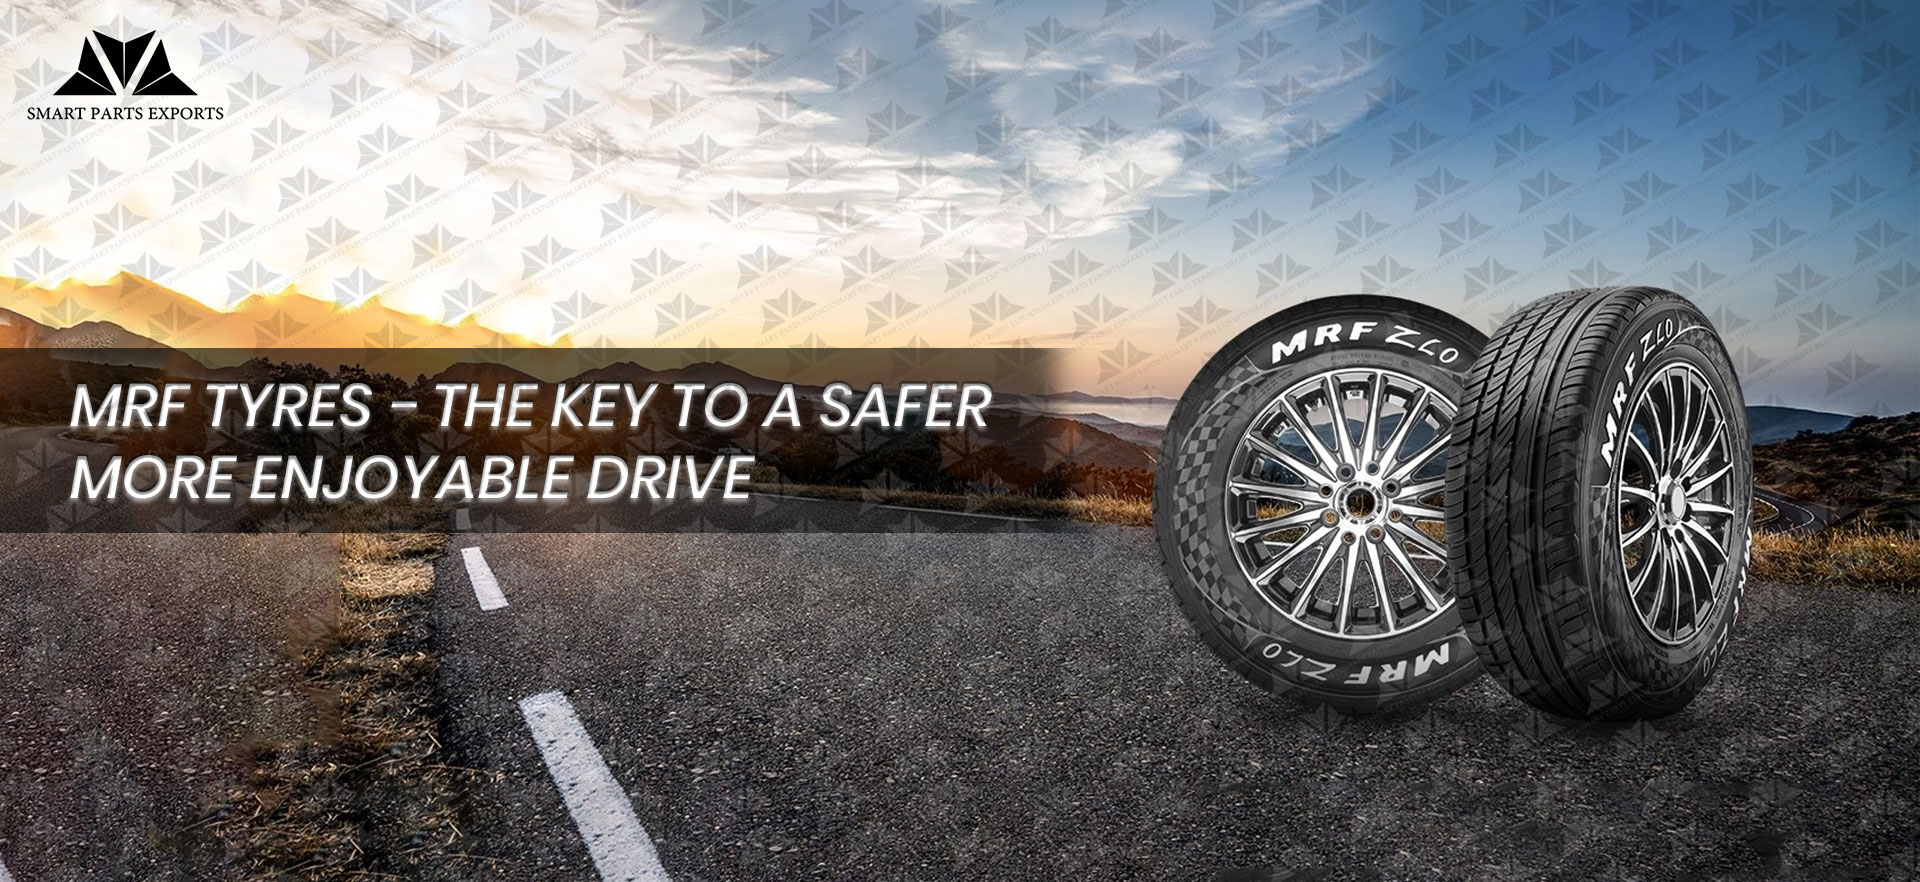 MRF Tyres - The Key to a Safer, More Enjoyable Drive